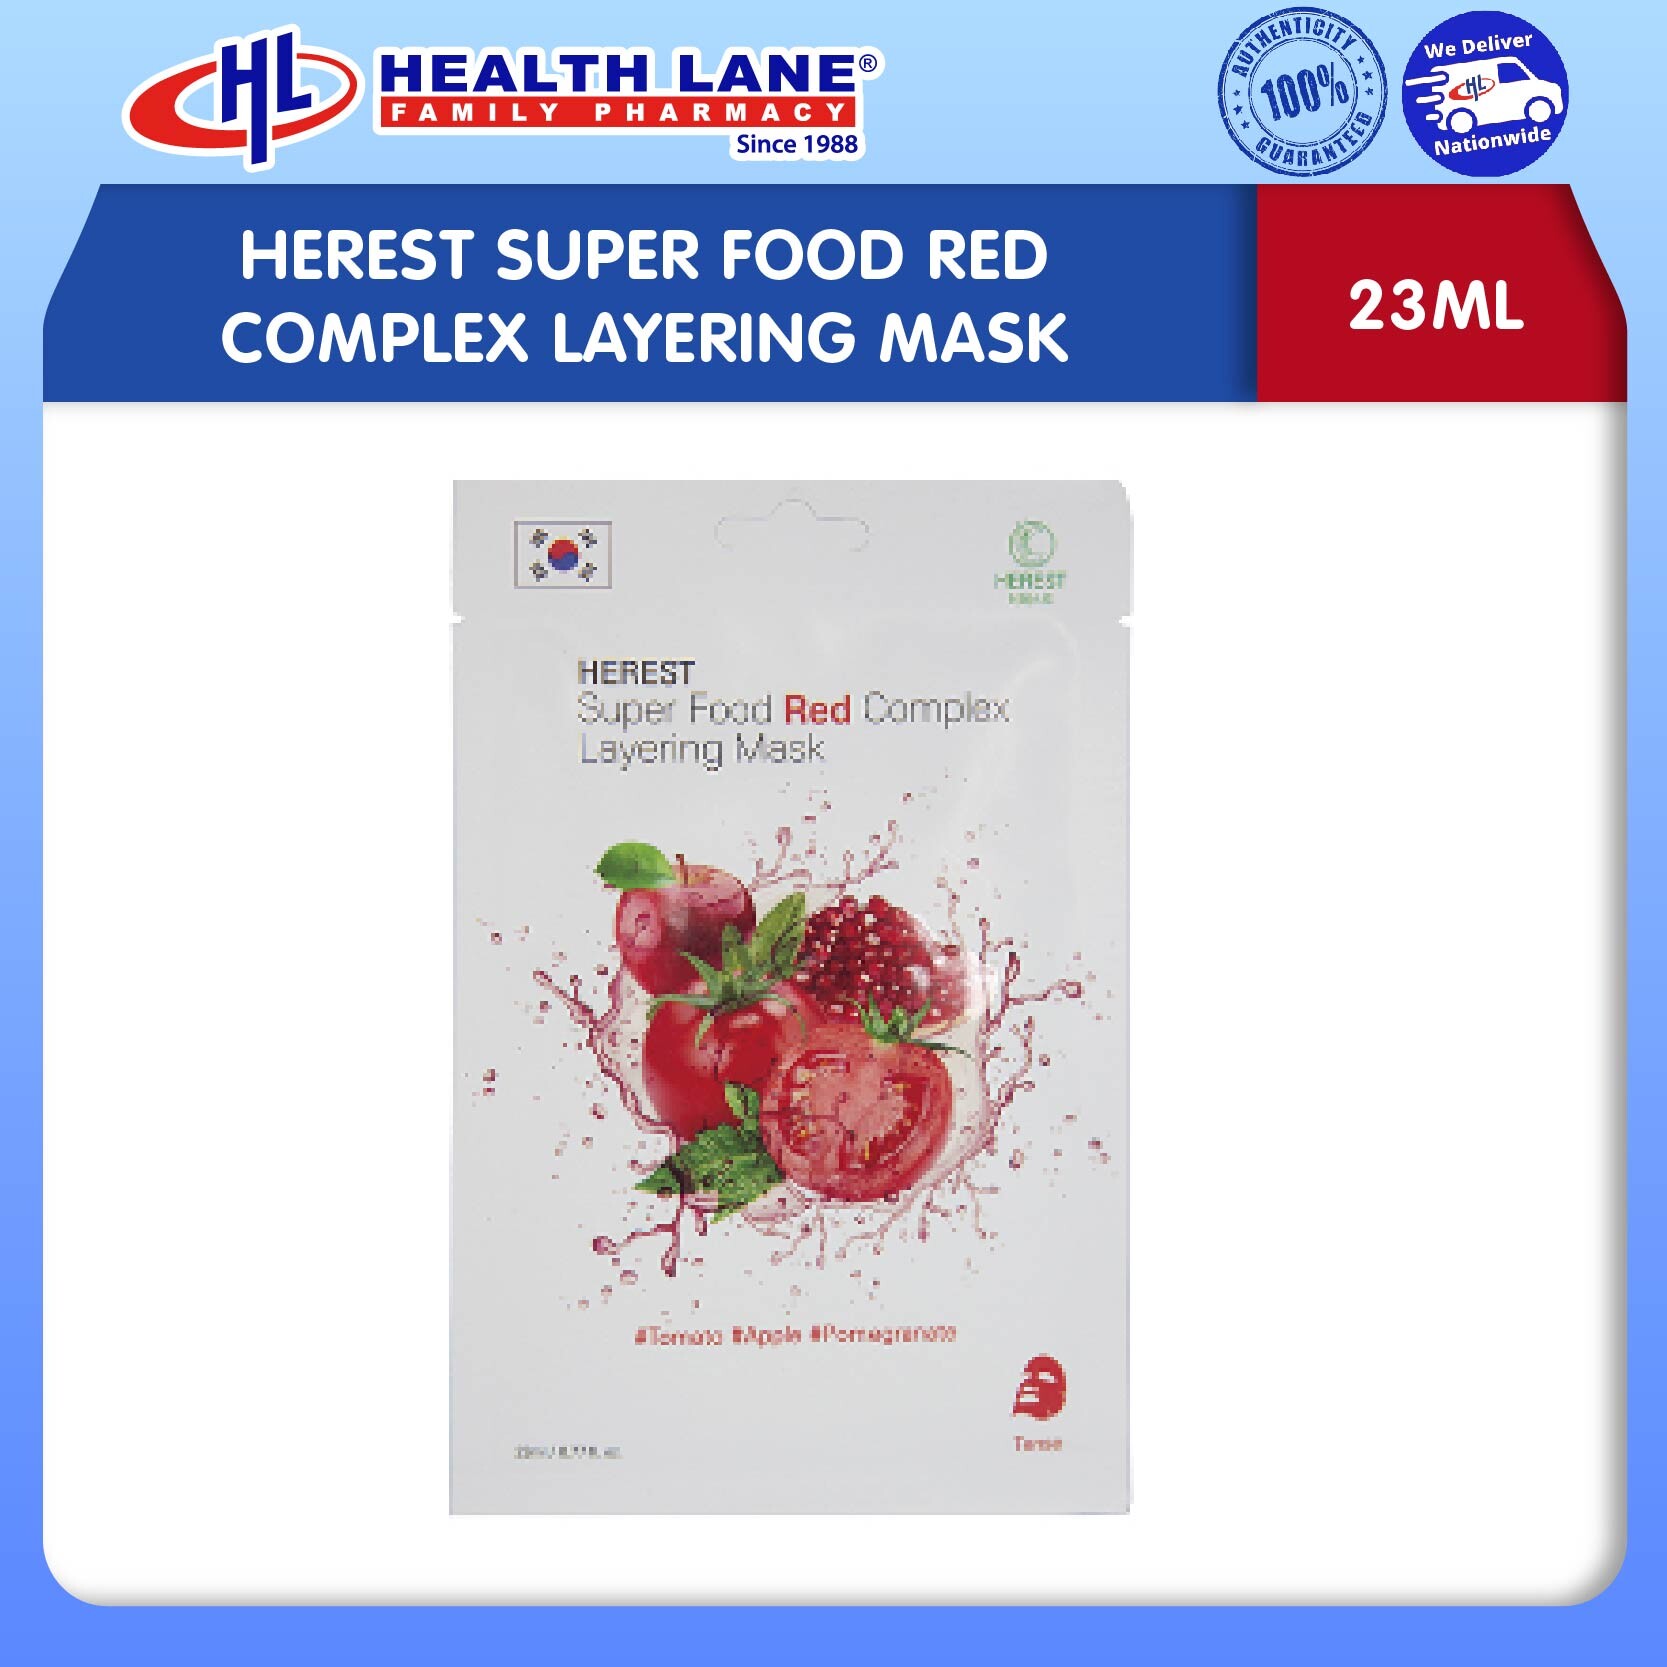 HEREST SUPER FOOD RED COMPLEX LAYERING MASK (23ML)